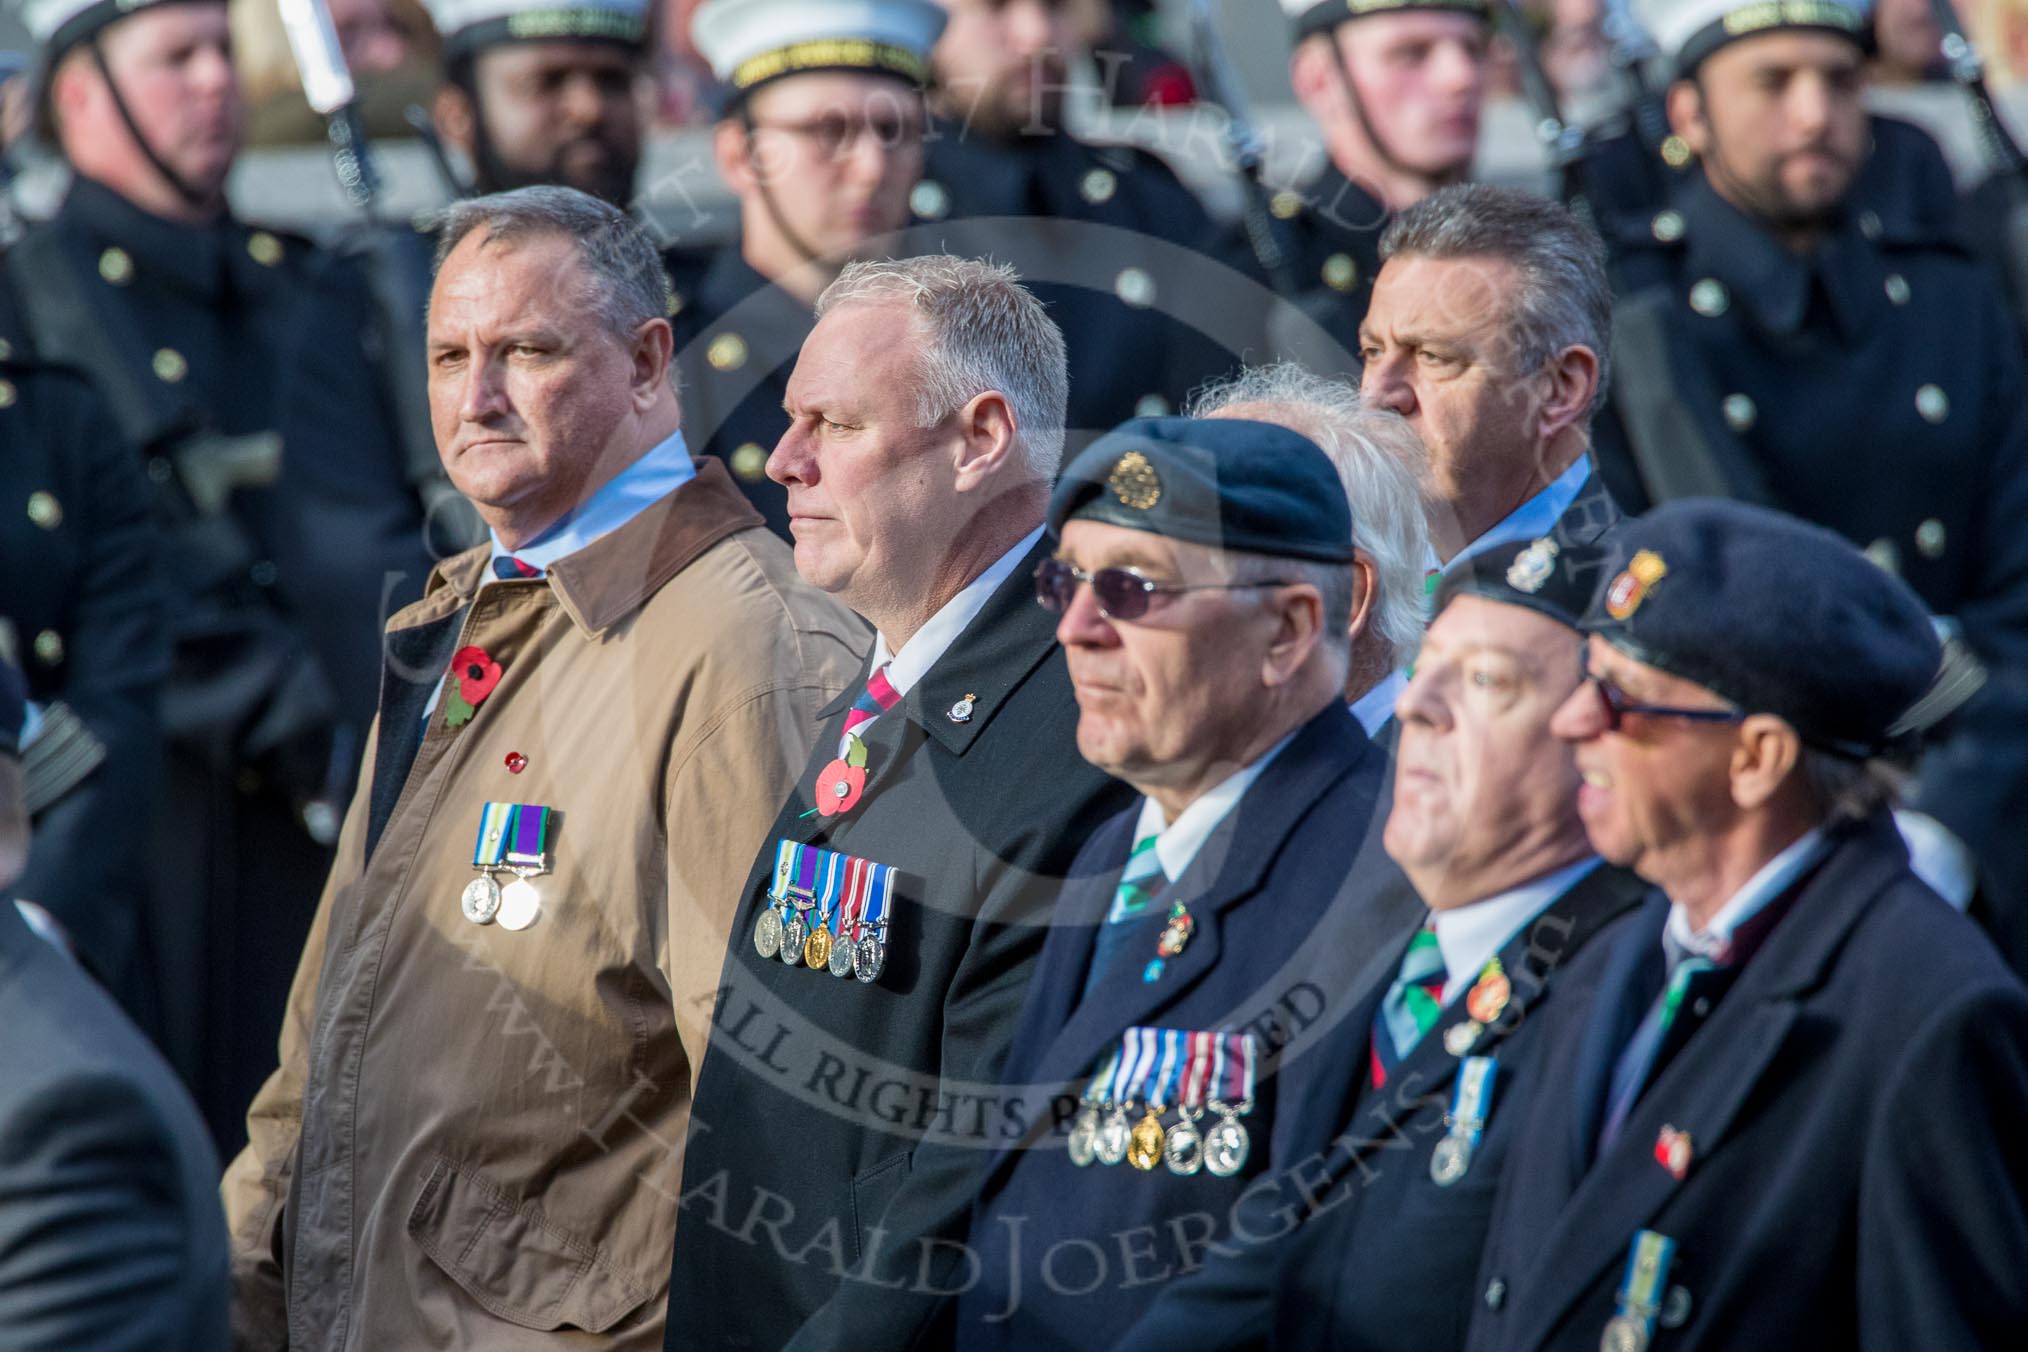 The South Atlantic Medal Association 1982 (Group F17, 150 members) during the Royal British Legion March Past on Remembrance Sunday at the Cenotaph, Whitehall, Westminster, London, 11 November 2018, 11:53.